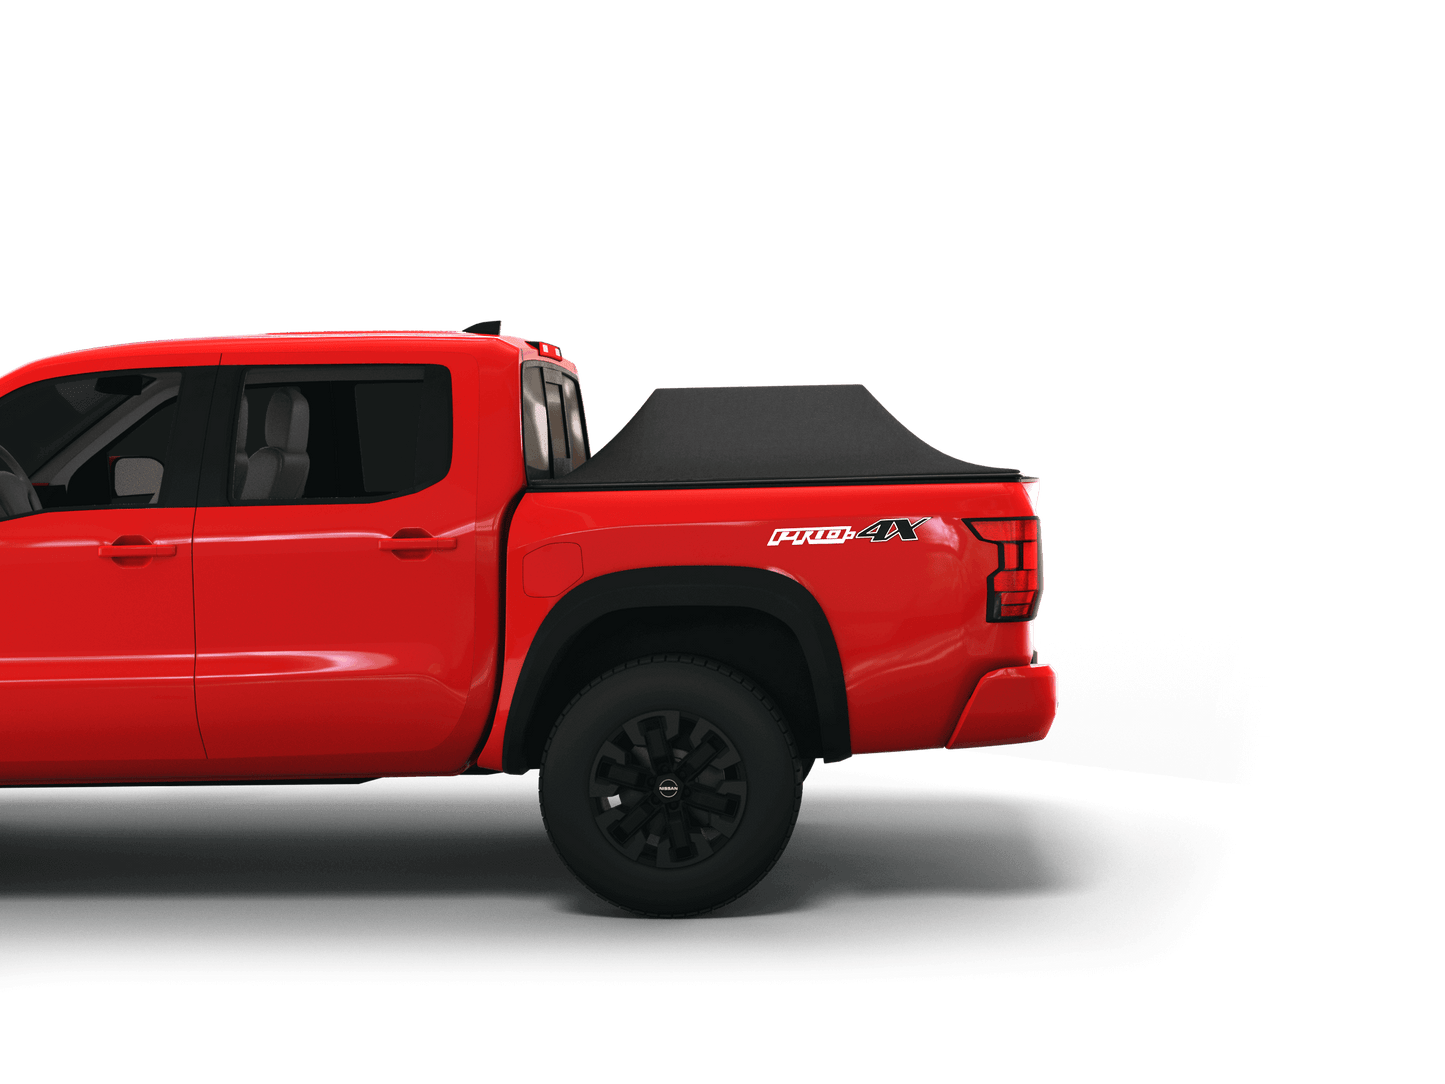 Red Nissan Frontier with Sawtooth Stretch tonneau cover expanded over cargo load